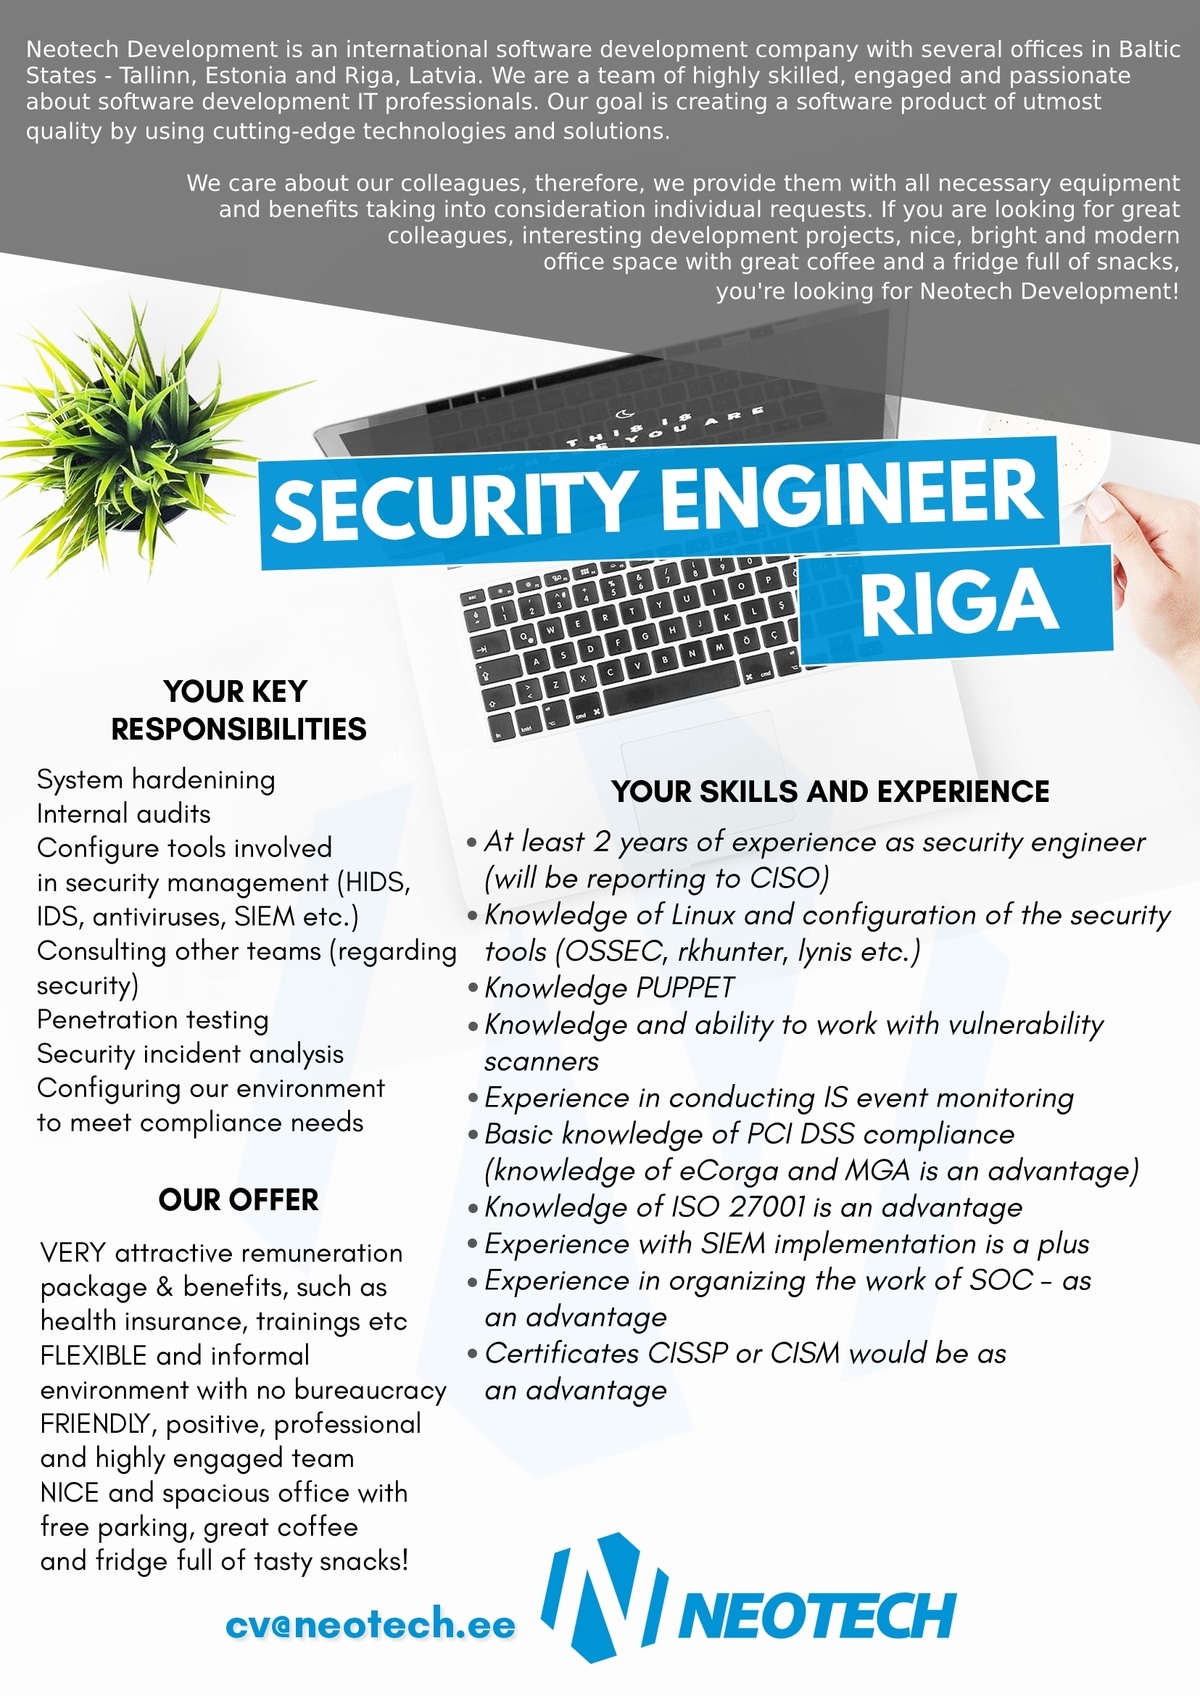 Neotech Development, SIA Information Security Officer